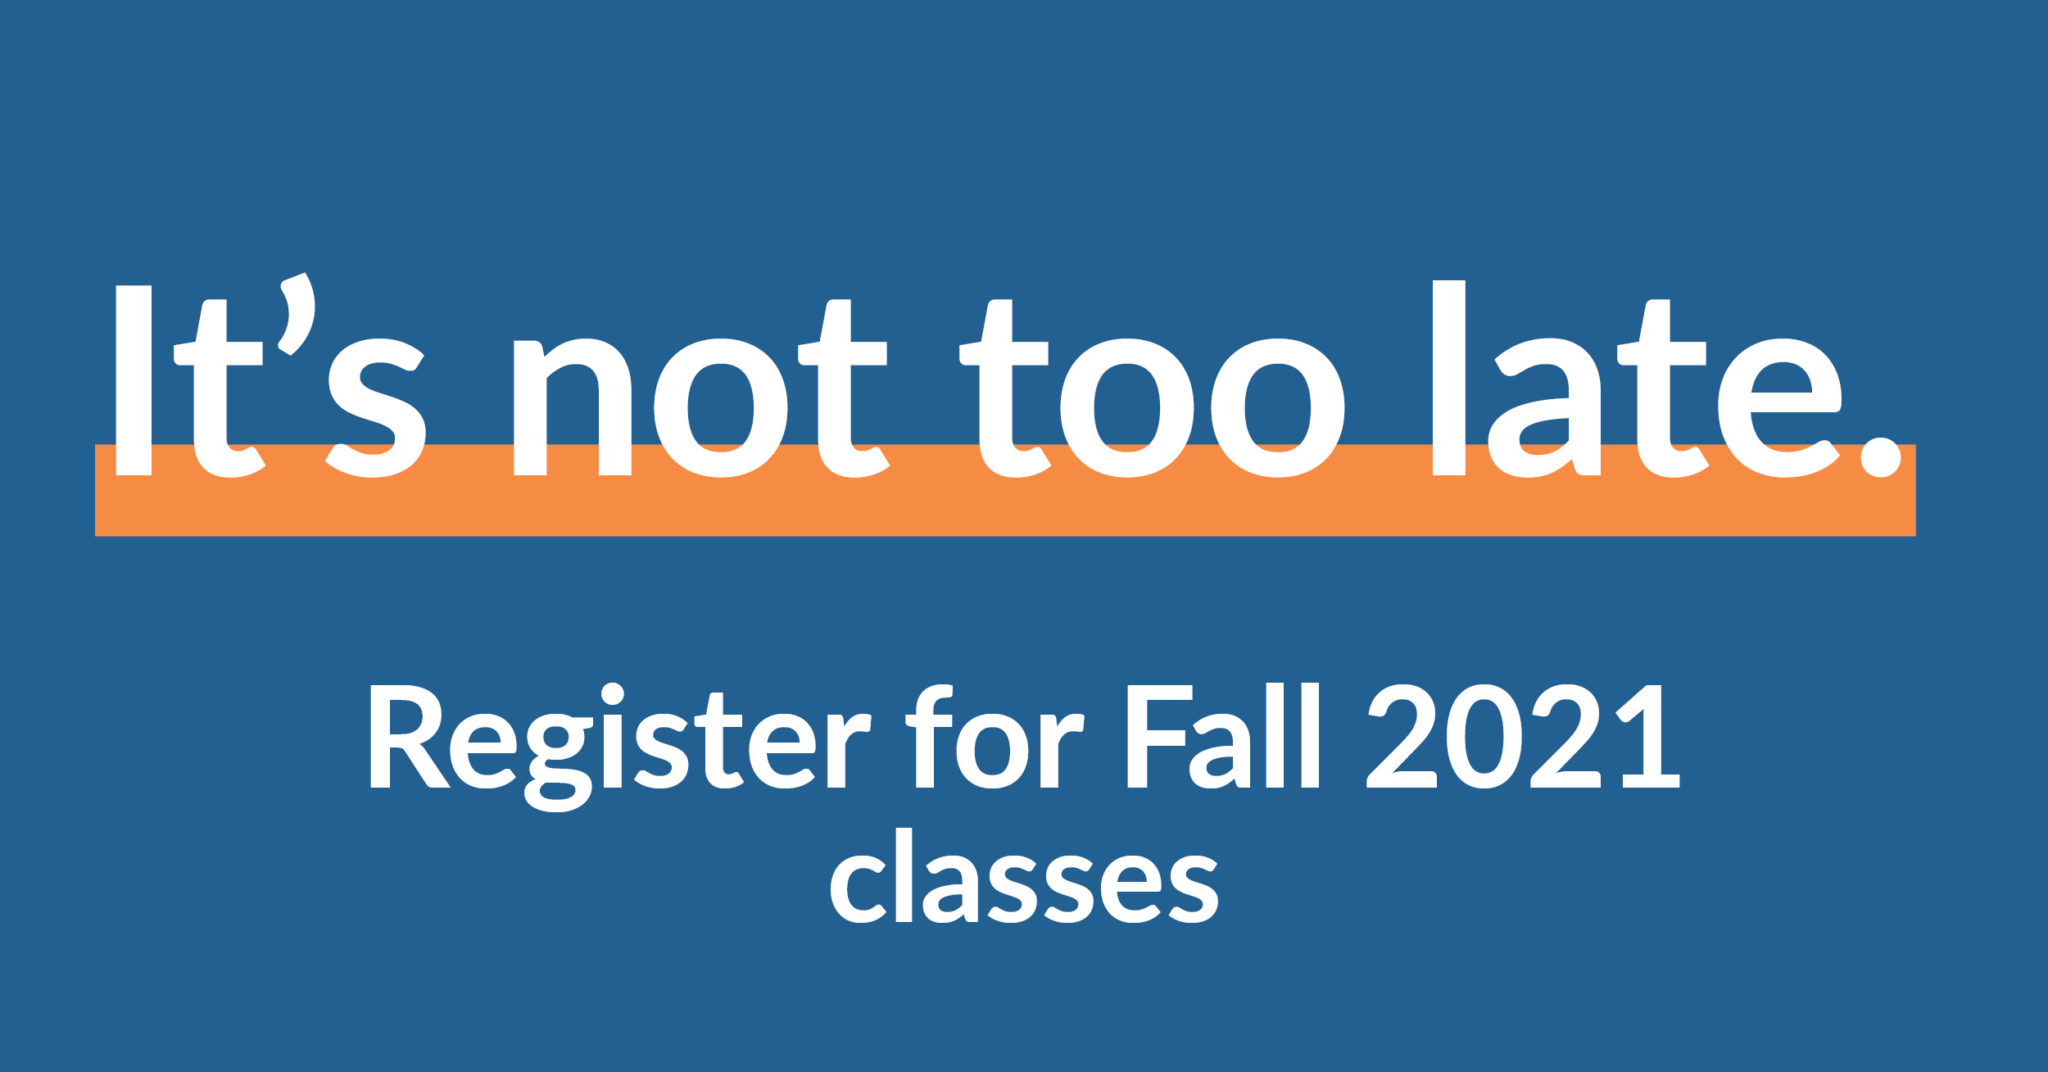 It's not too late. Register for Fall 2021 classes